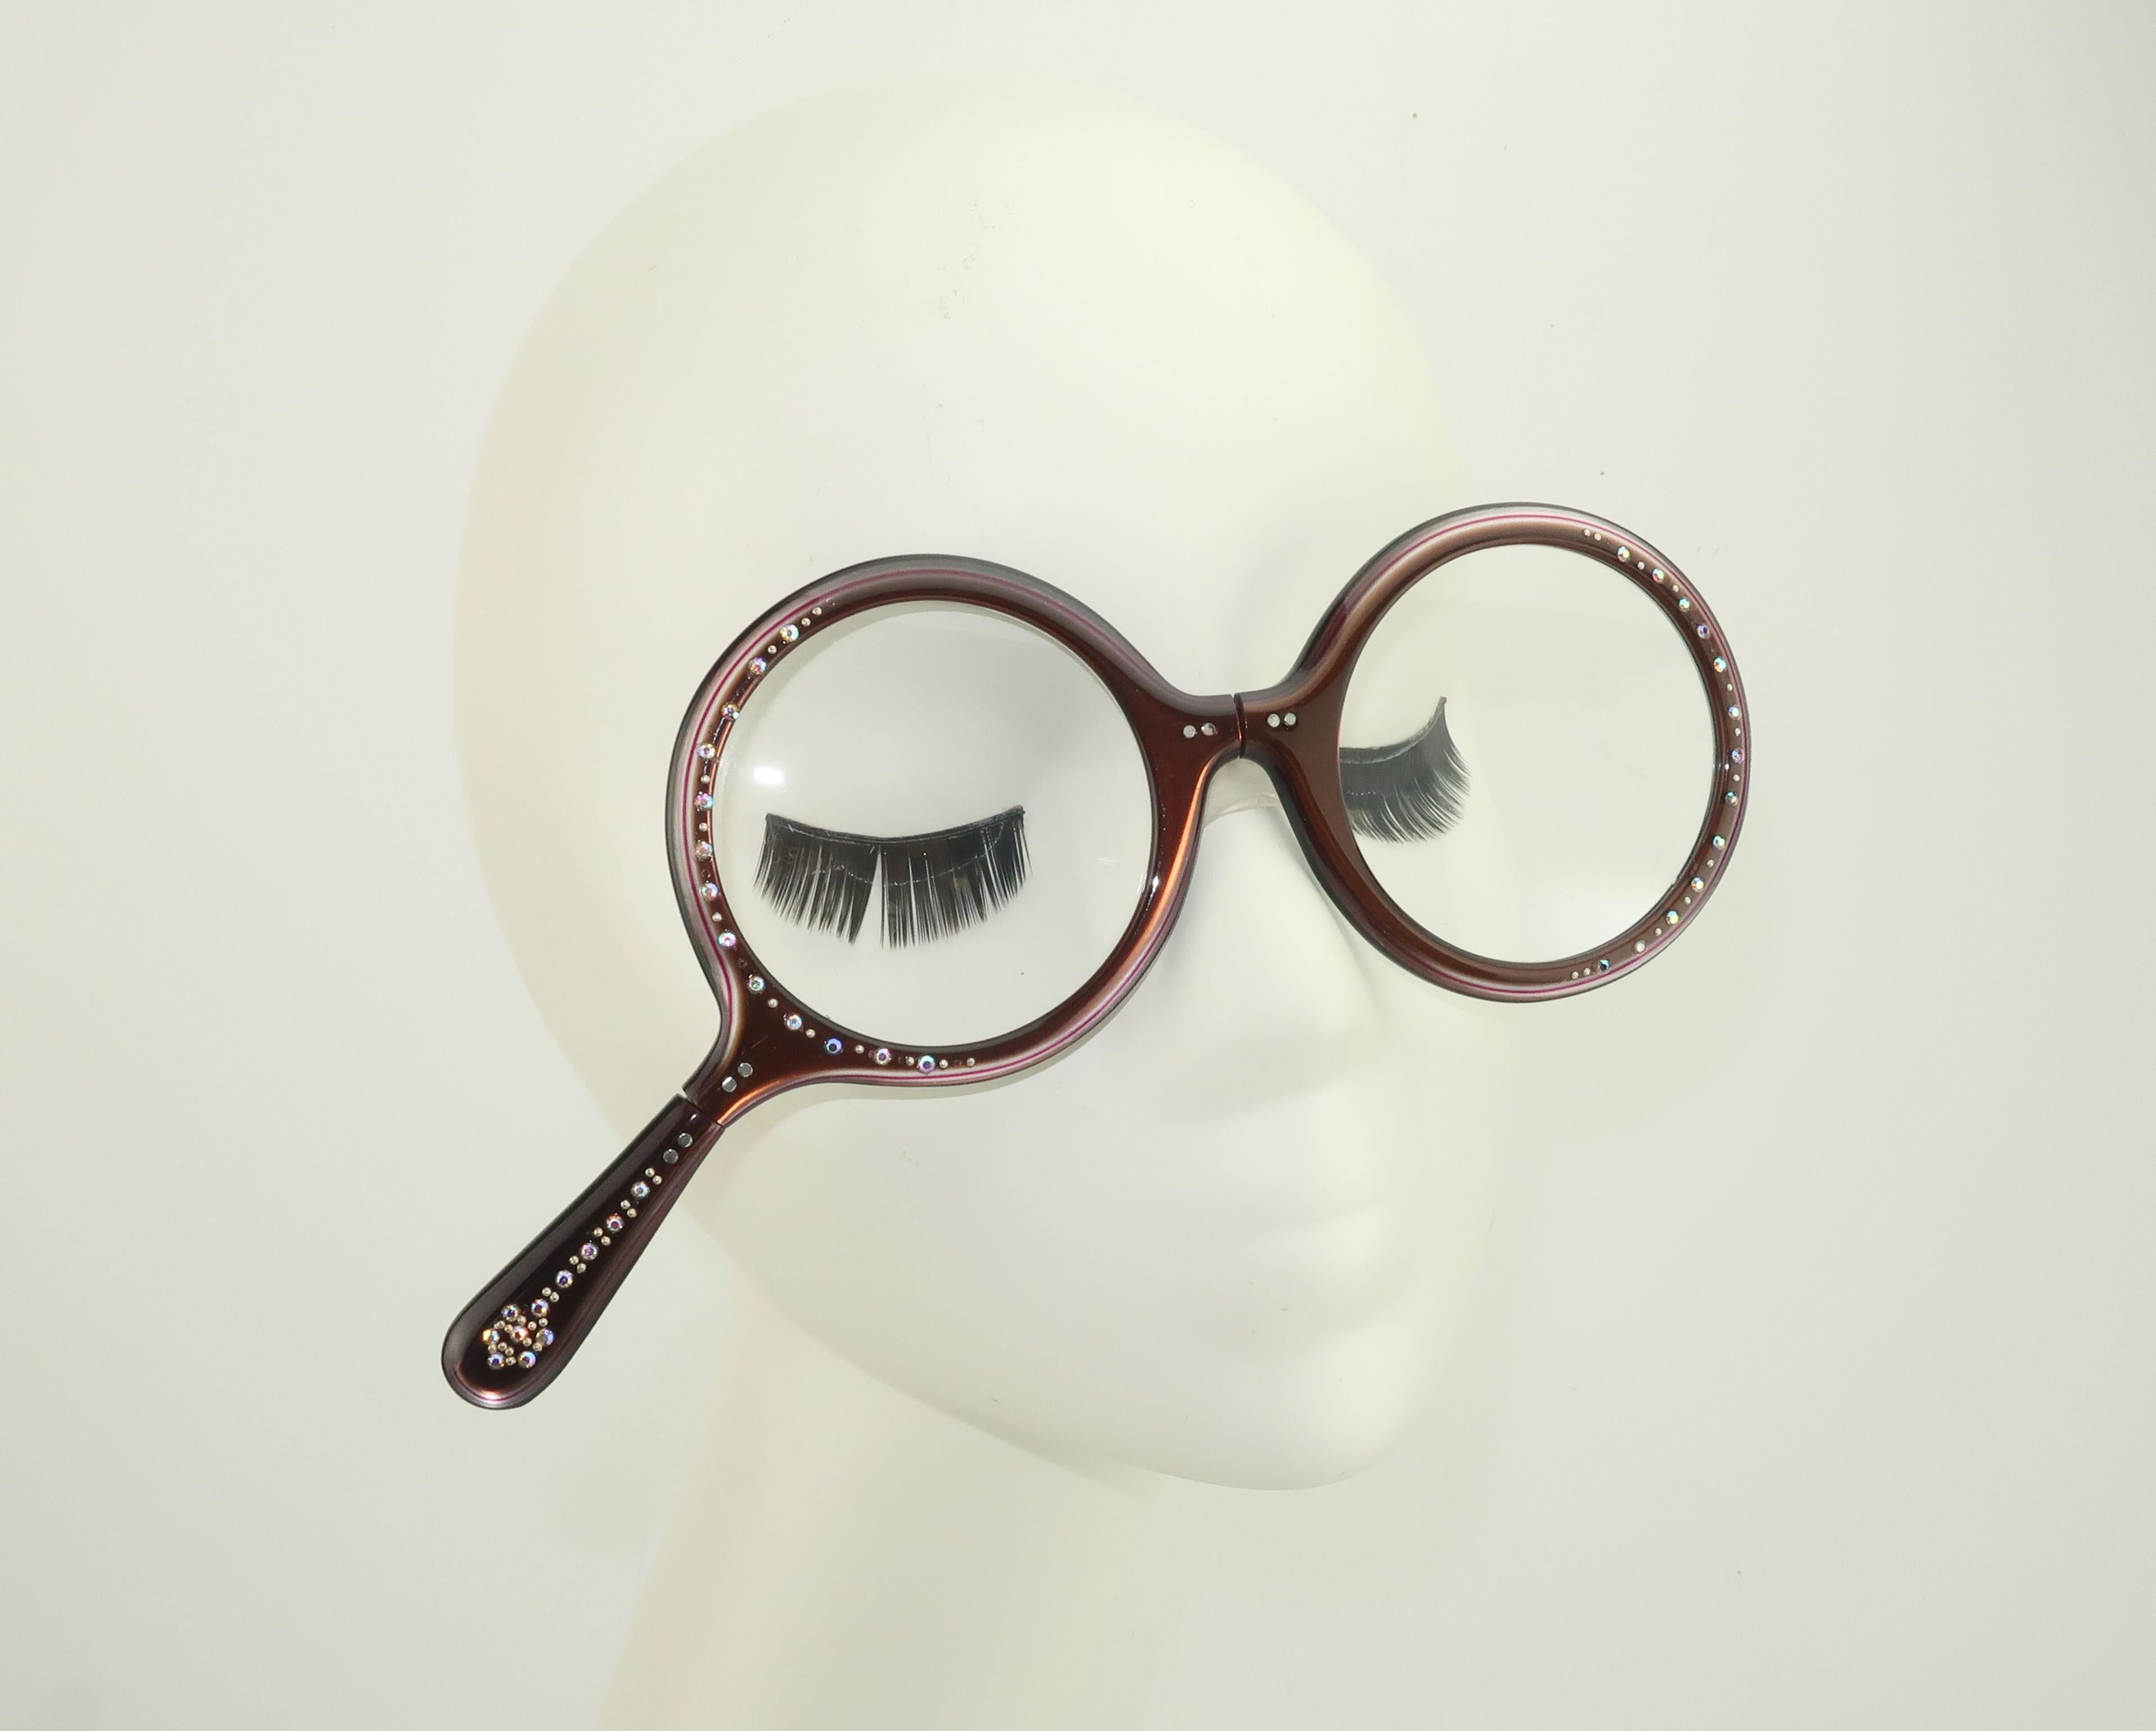 Vintage milk chocolate brown foldable lorgnette reader or magnifying glasses with rhinestone accents and an exaggerated round look.  There is a subtle red stripe running the circumference of the lens that gives the frame the hint of a light purple